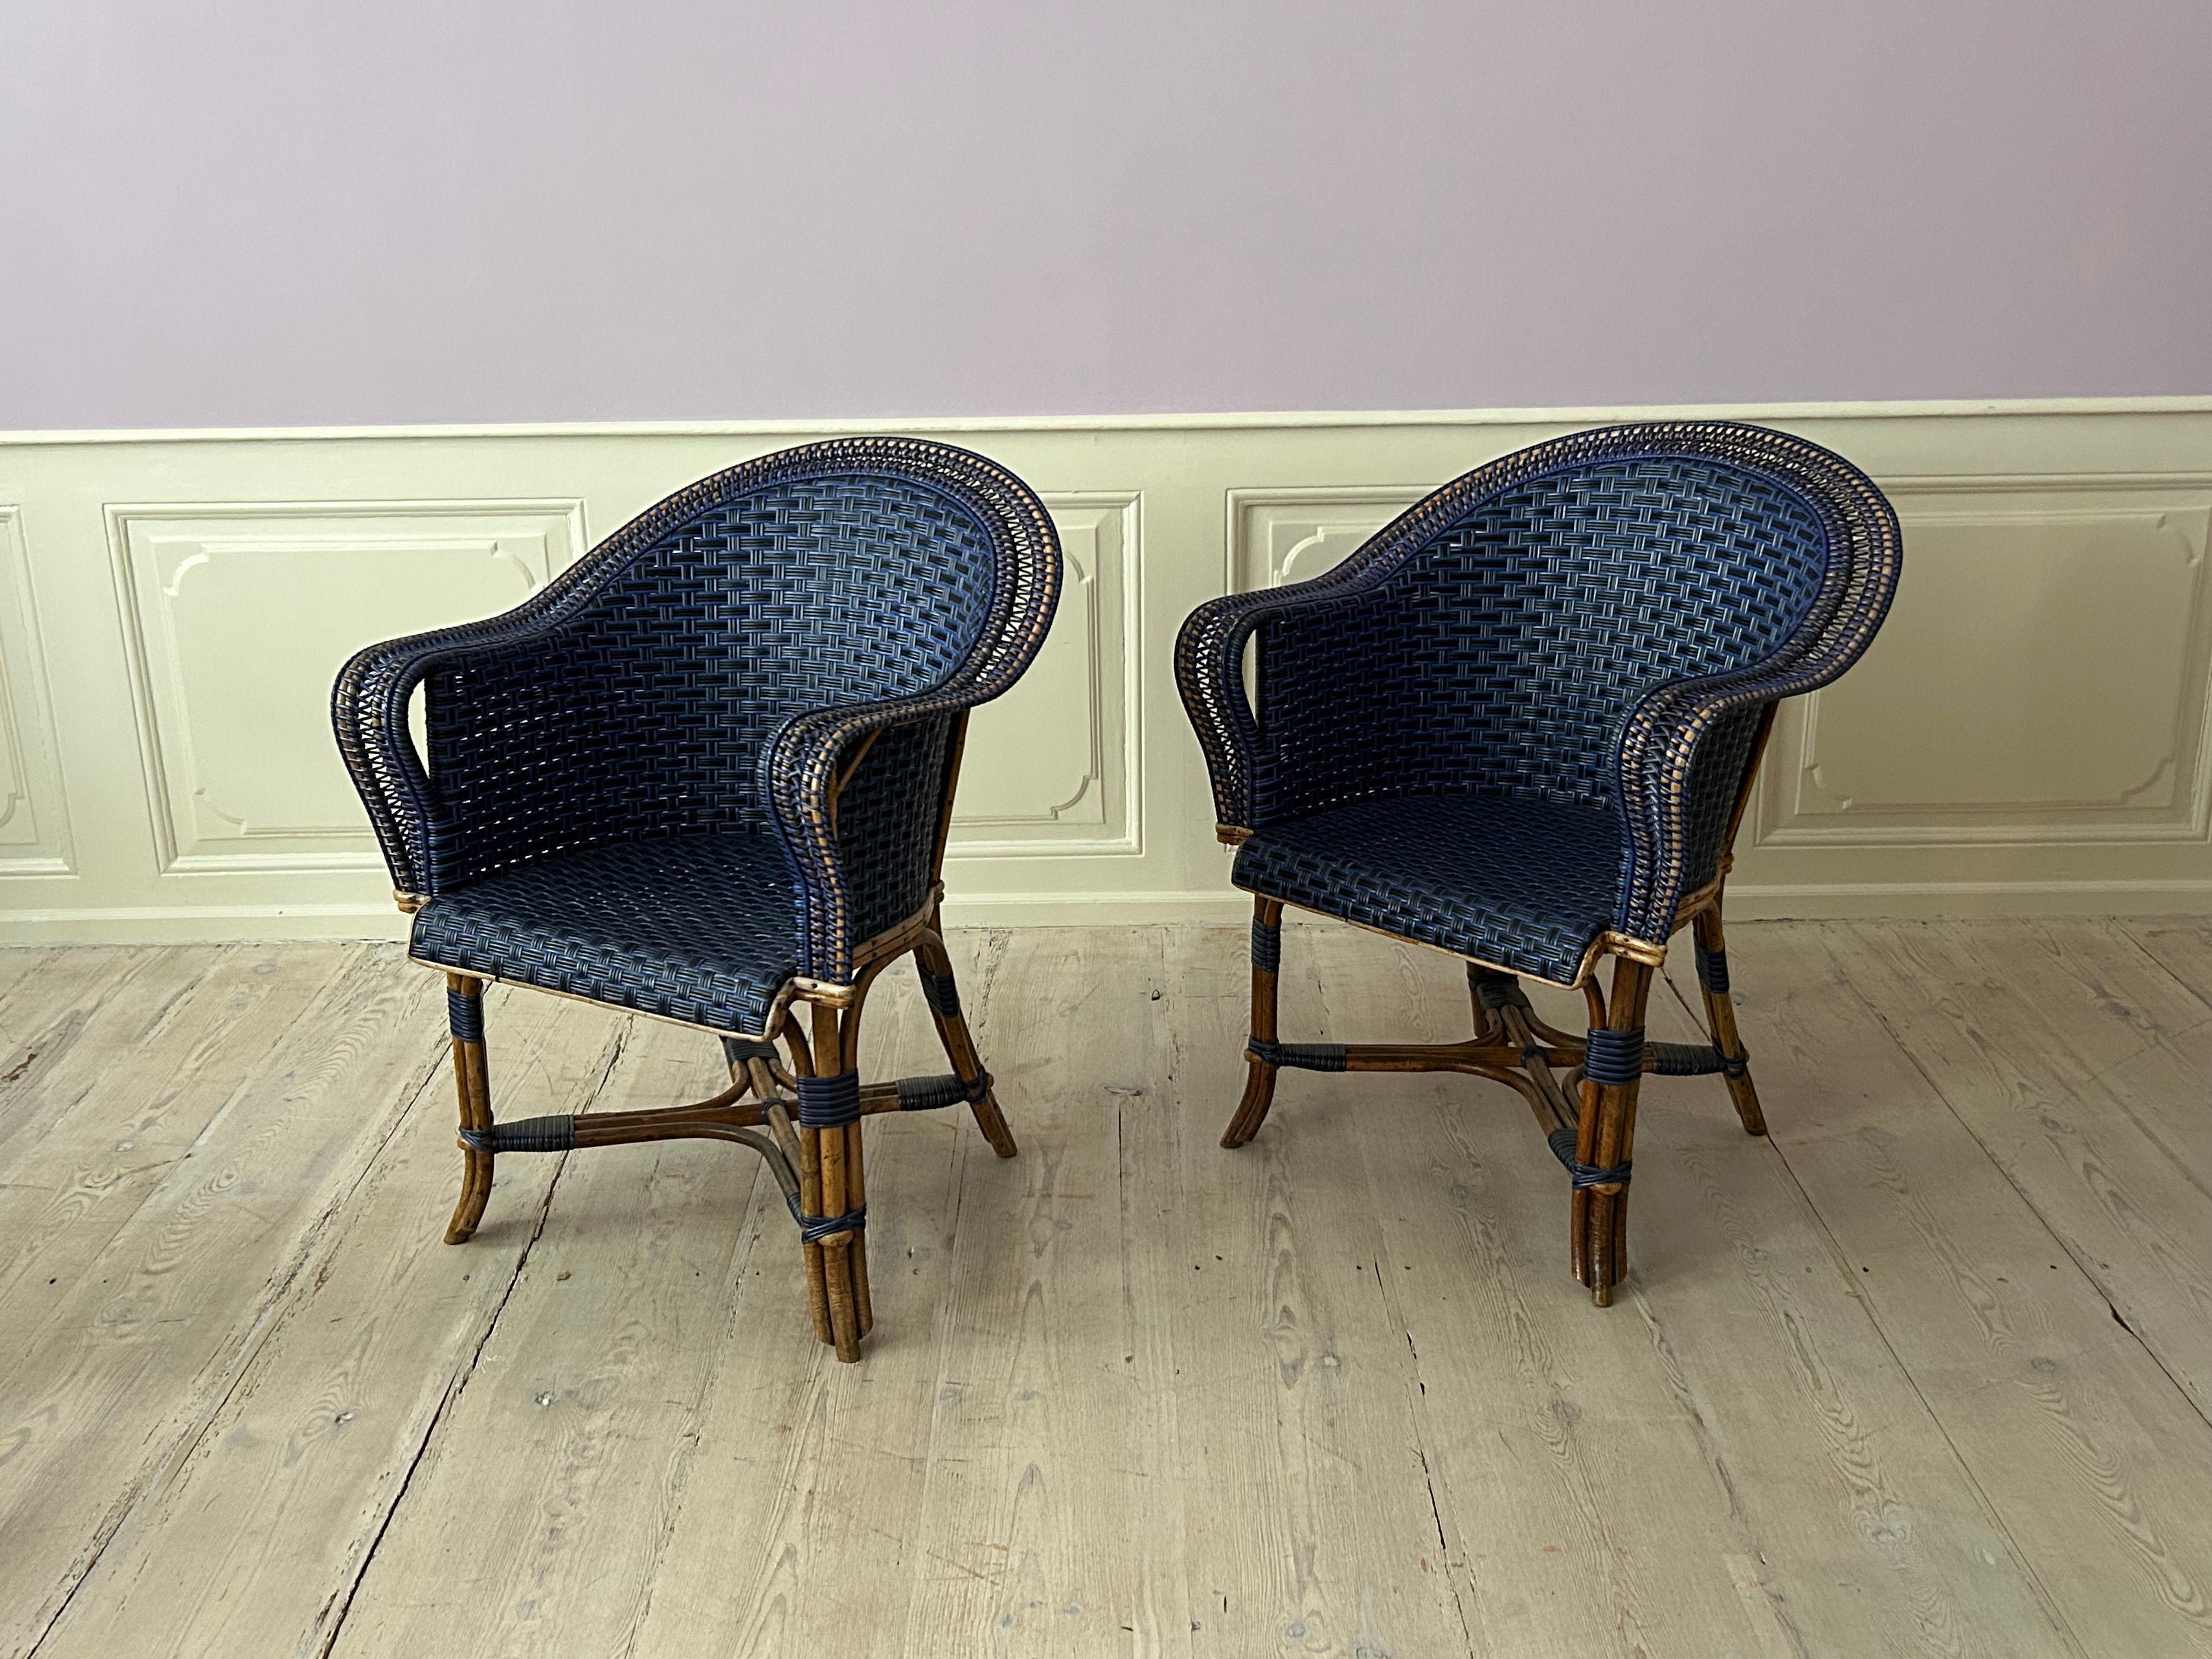 Vintage Pair of Armchairs in Blue and Black Rattan, France, Early 20th Century For Sale 1